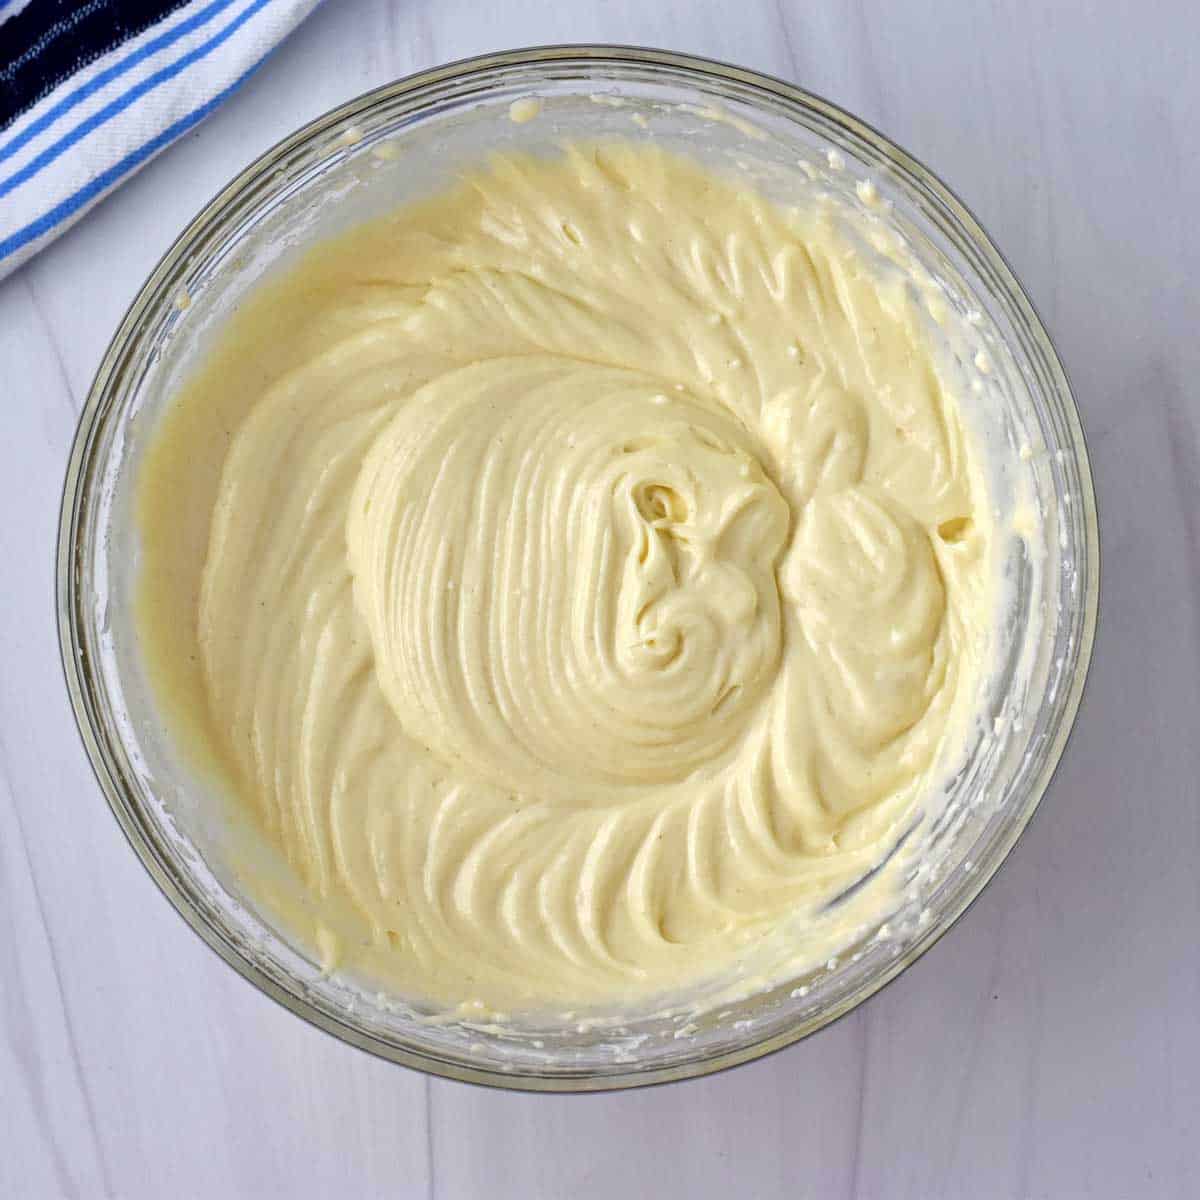 Cream cheese filling in glass mixing bowl.